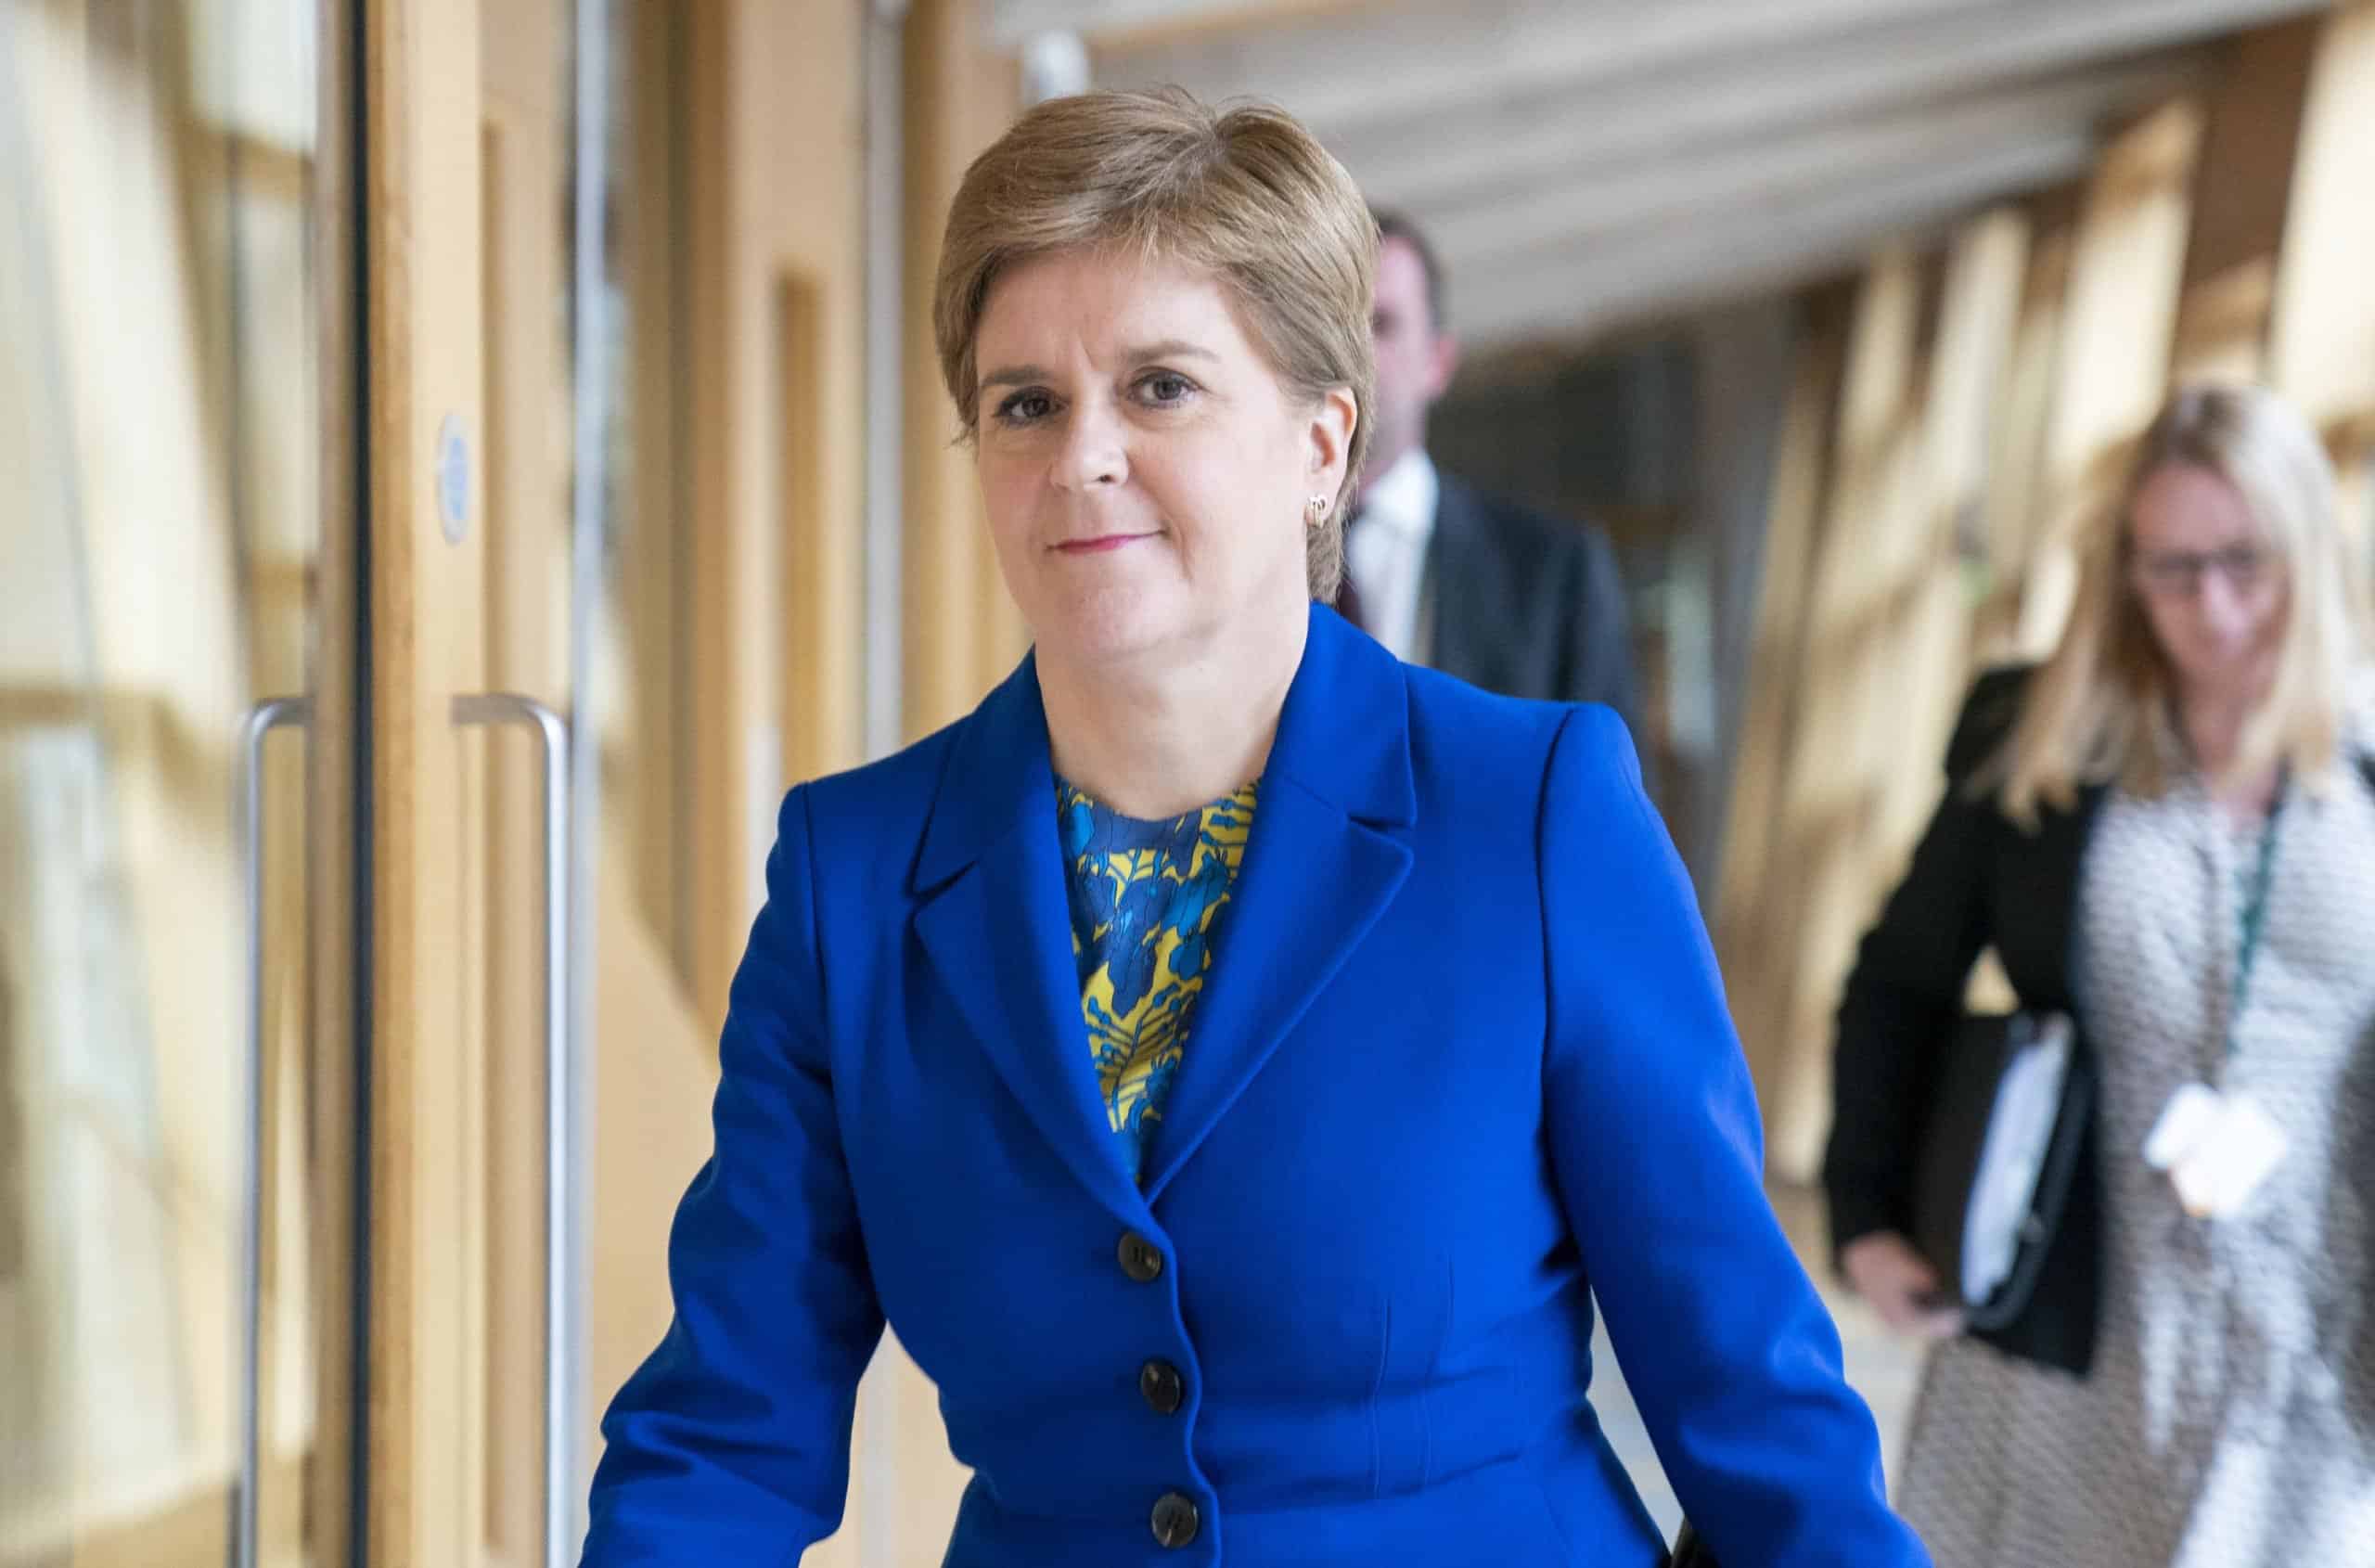 ‘It is absurd’: Sturgeon says she has no contact from Truss since she entered No 10